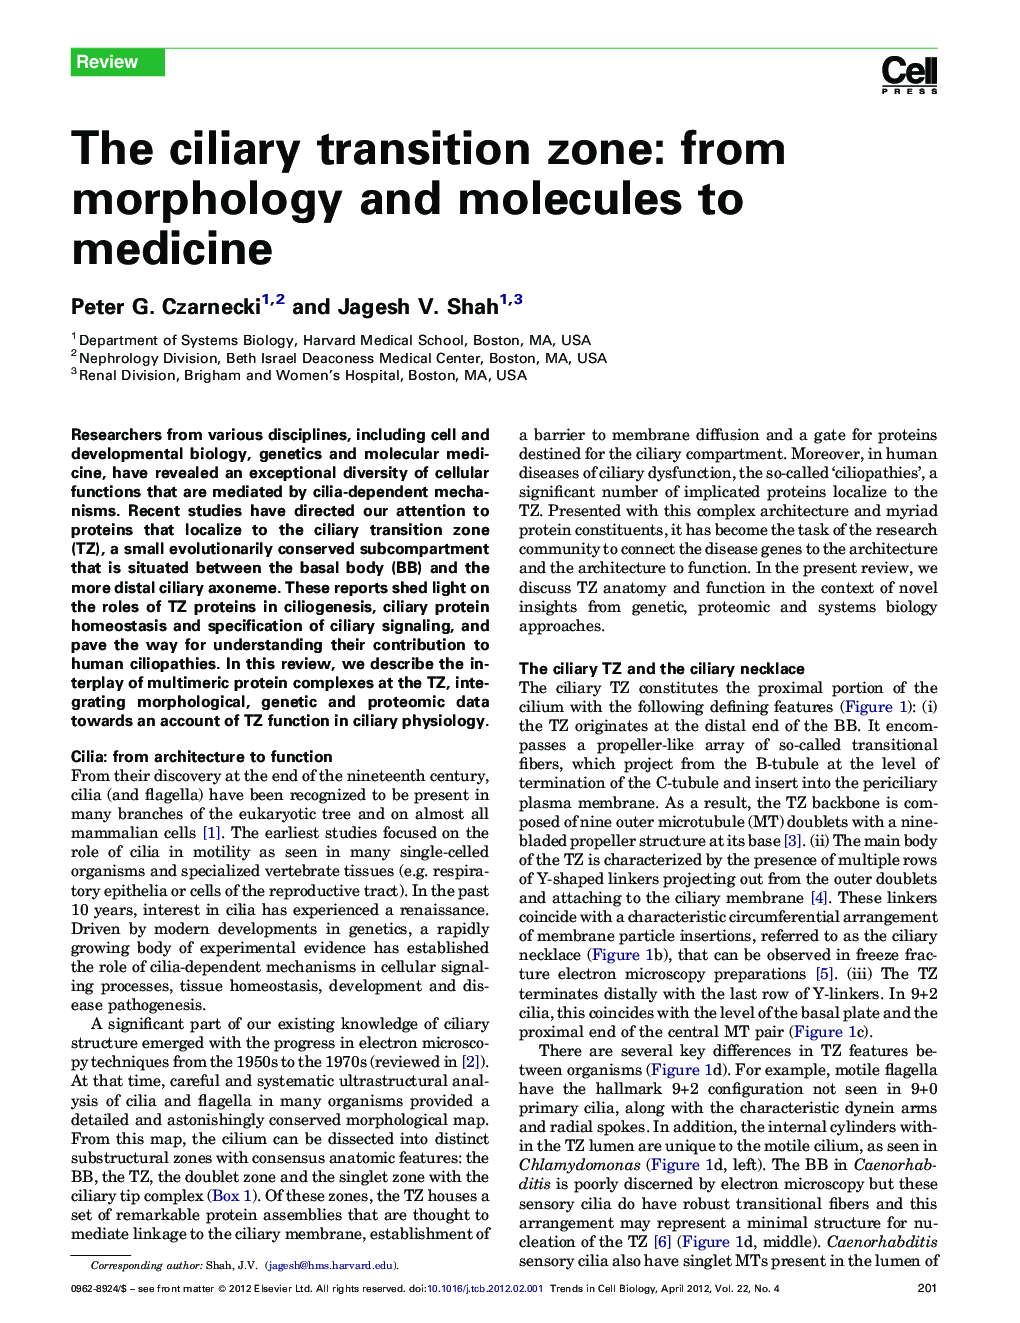 The ciliary transition zone: from morphology and molecules to medicine